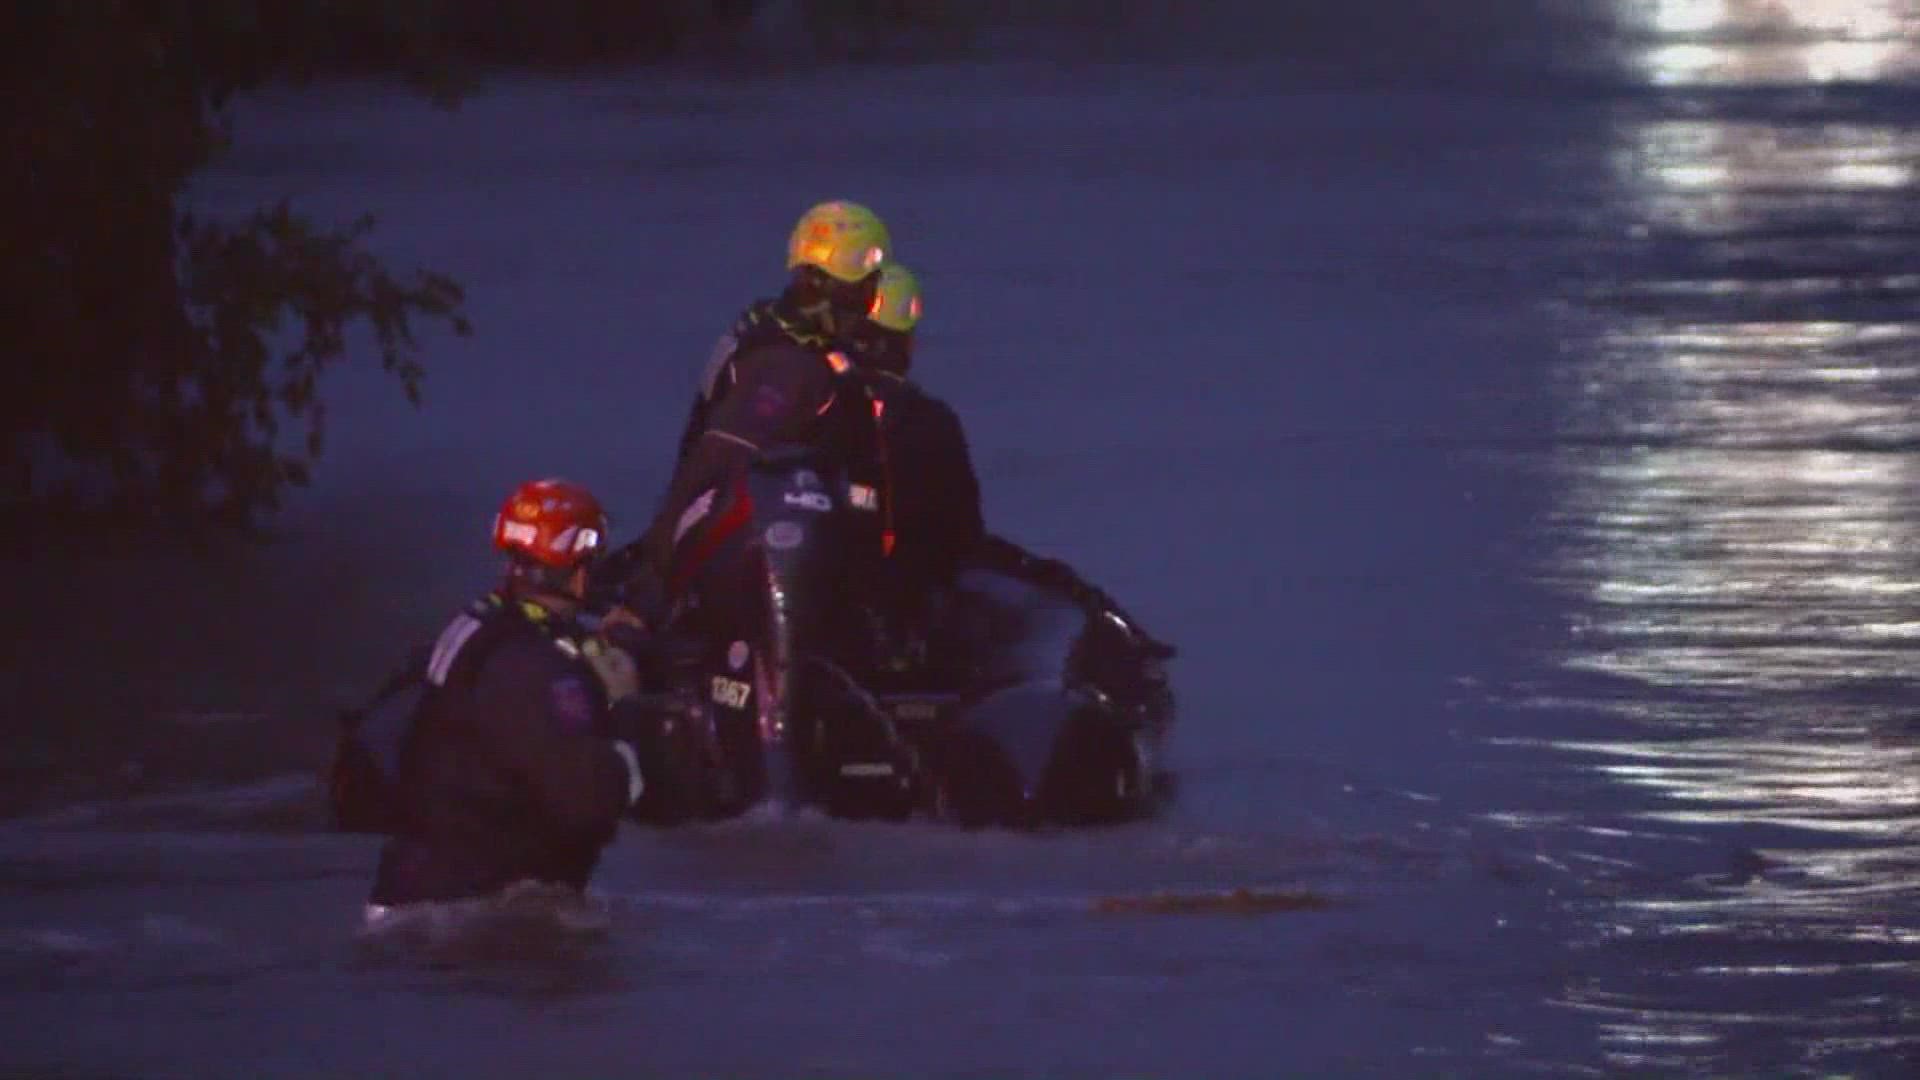 Texas Man Dies After Being Rescued from Vehicle Swept Away by Flash Floods in Arlington